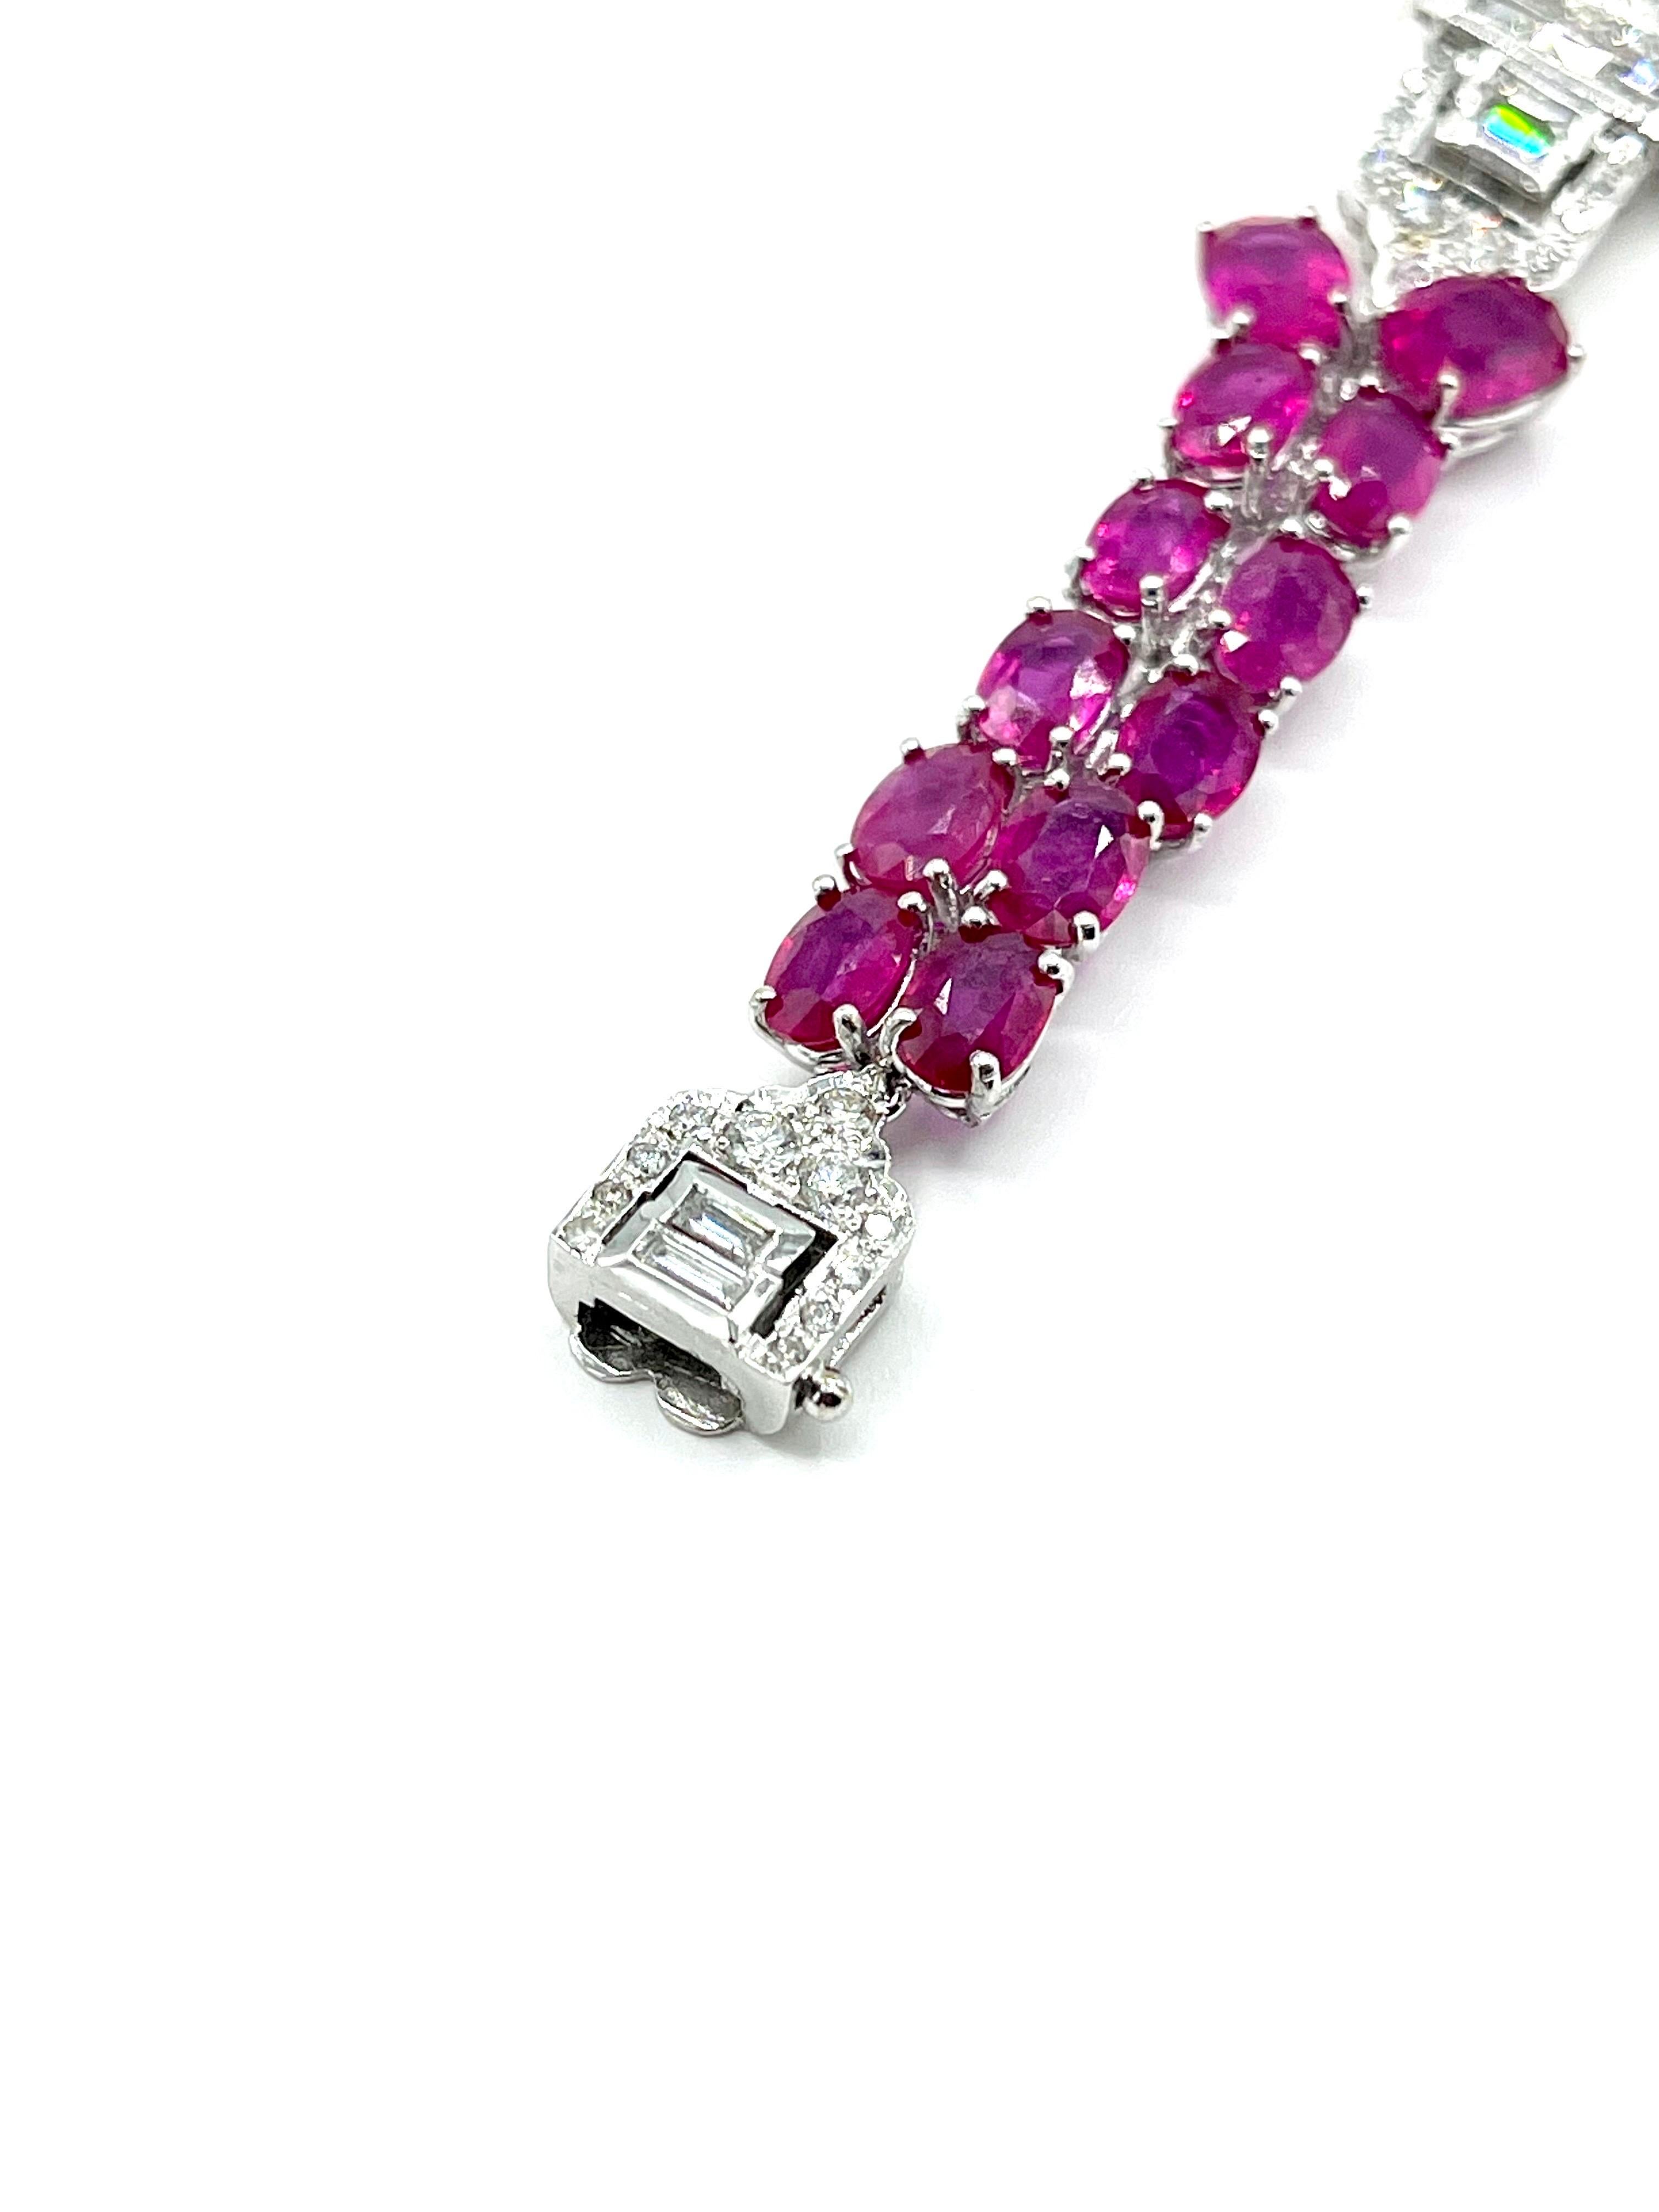 This is a show stopper!  This bracelet features 38.90 carats in beautiful Rubies, prong set in three rows in the center, and two rows on each end.  The Rubies are broken up by two Diamond stations, and a hidden Diamond box clasp, in white gold.  The